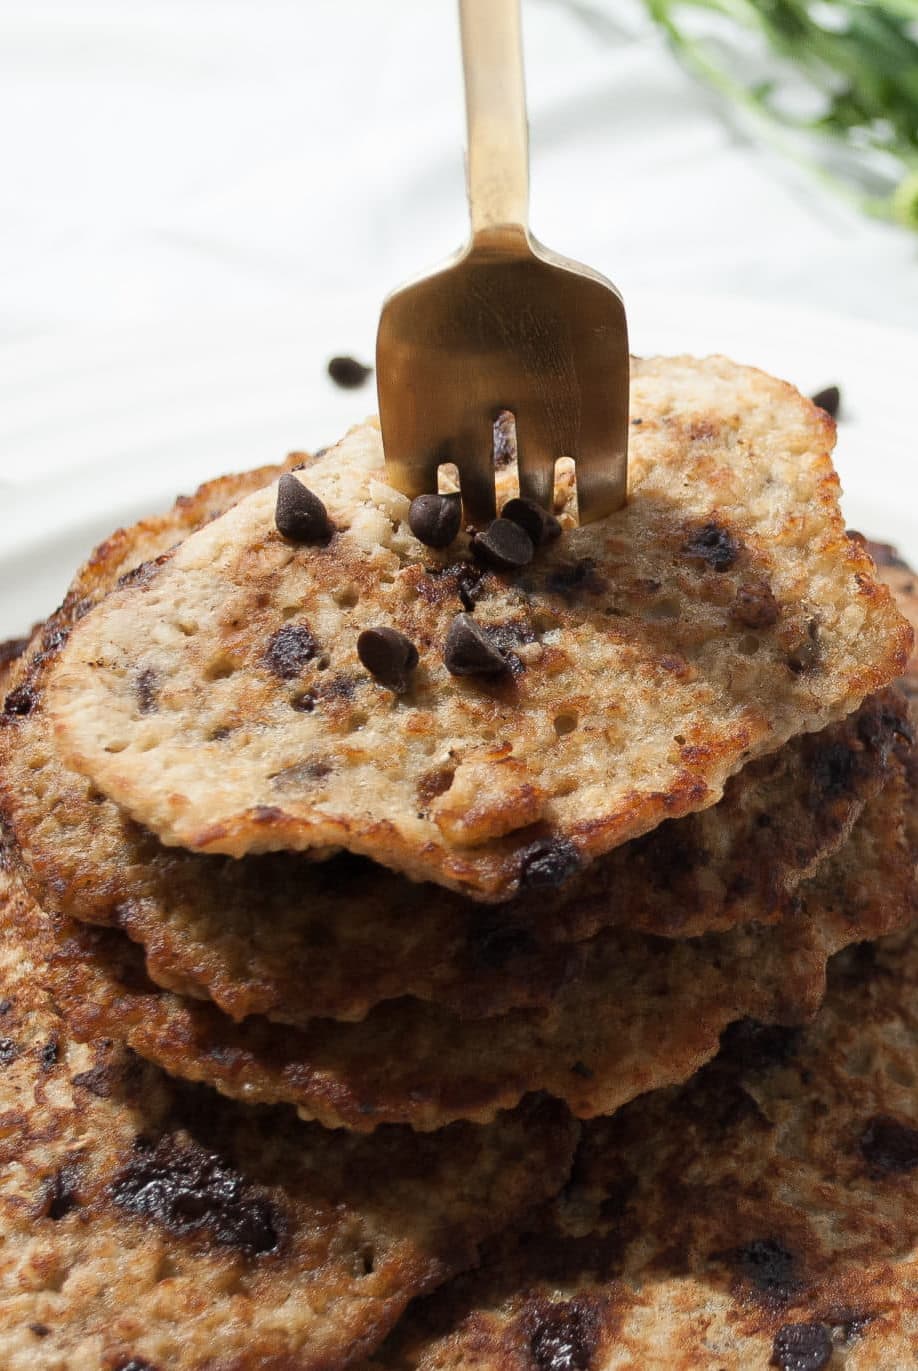 A gold form is stabbing through a stack of 5 banana pancakes. The pancakes have chocolate chips in the and are browned perfectly.